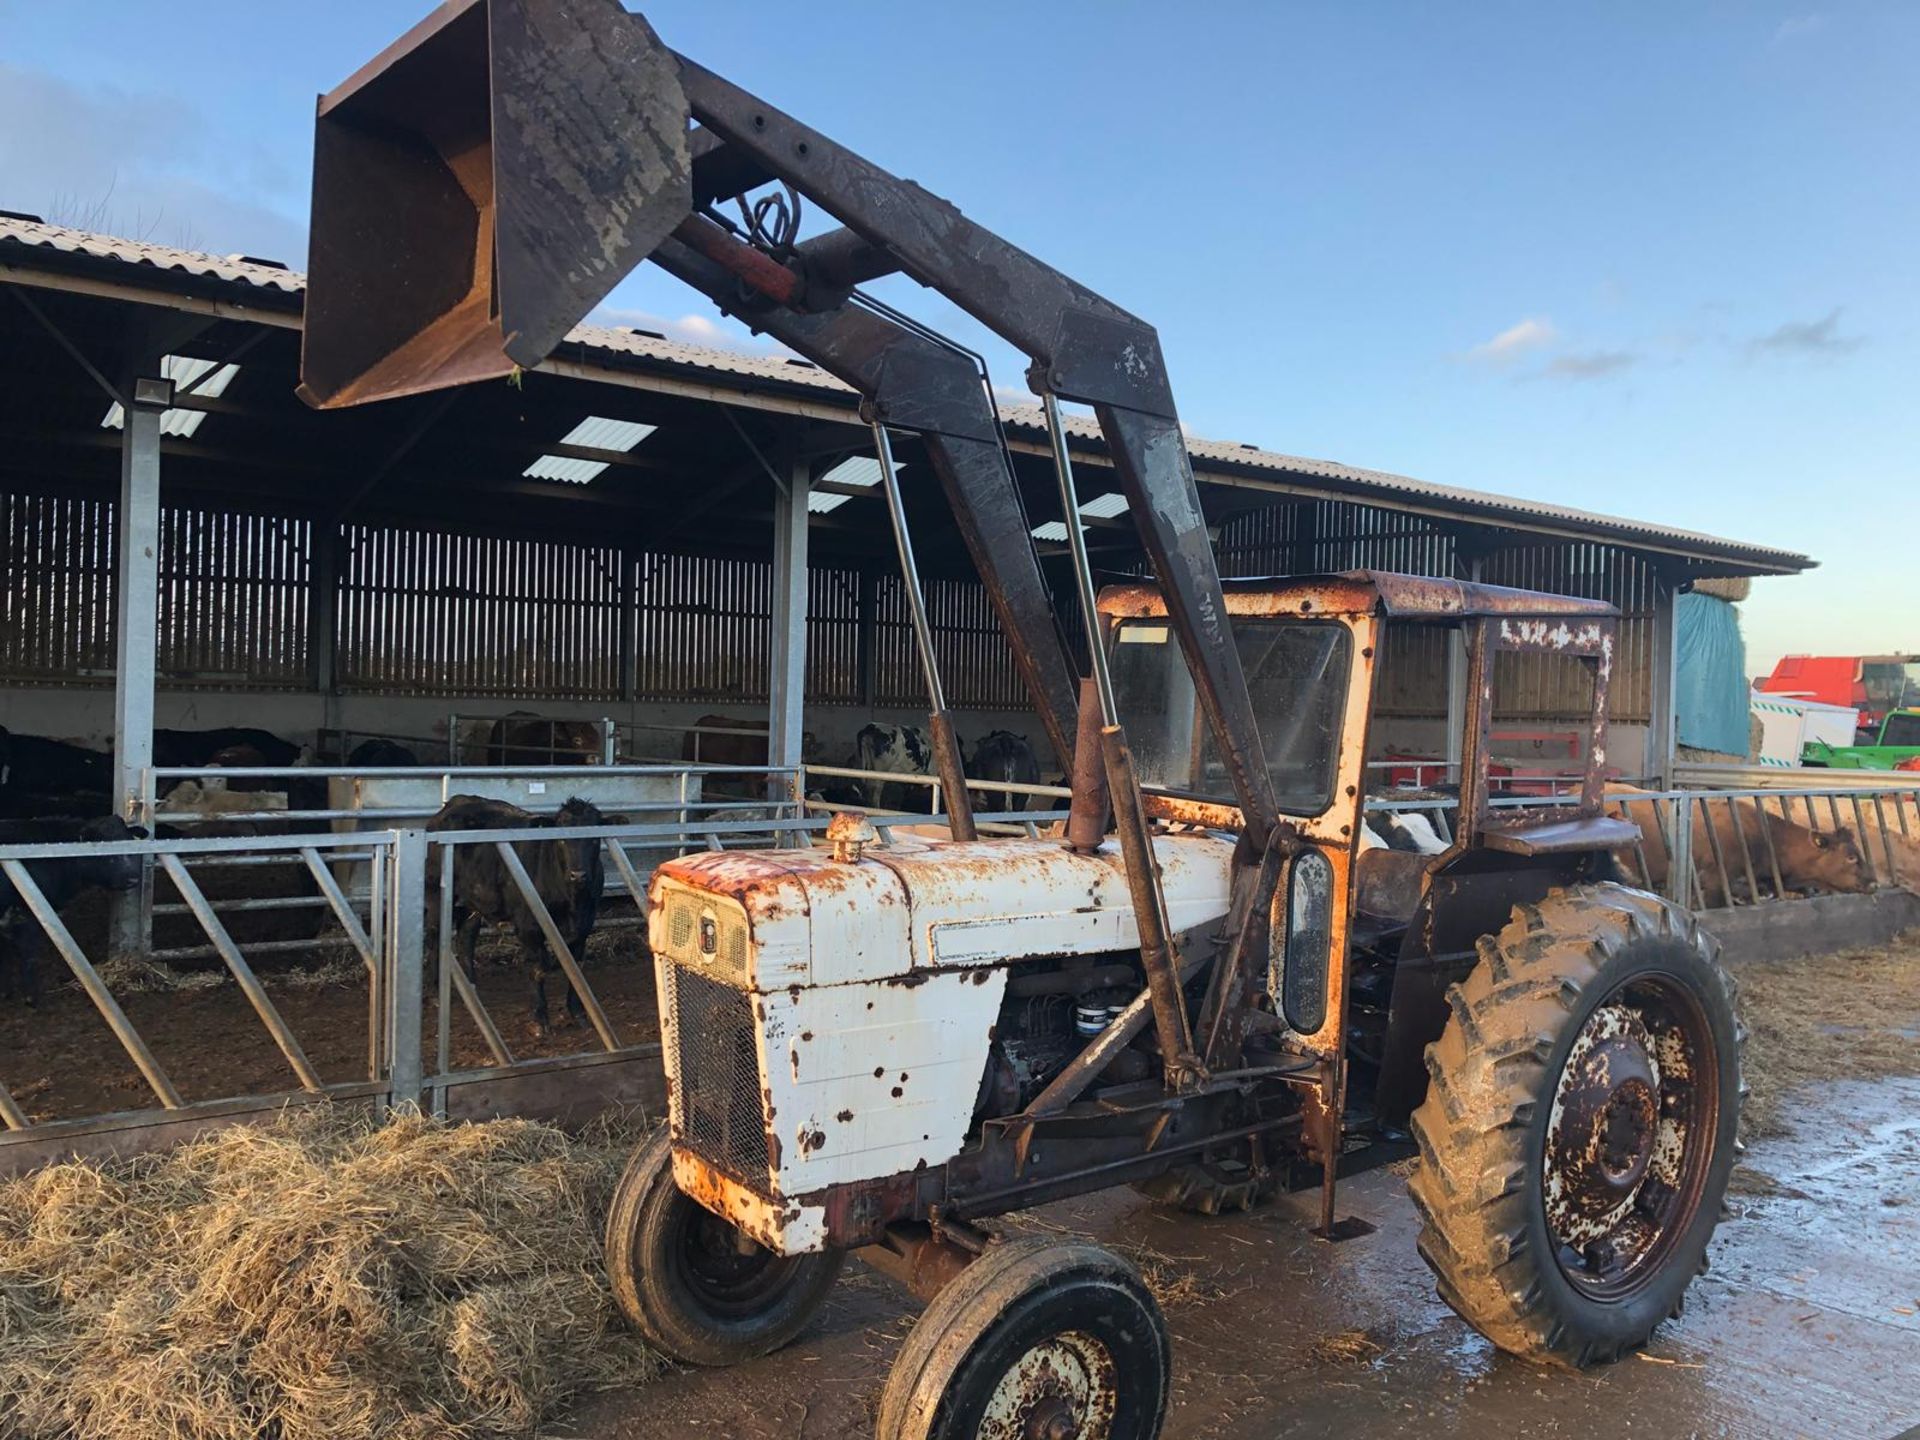 1971 DAVID BROWN 1200 TRACTOR, STARTS WITH A JUMP PACK, DRIVES AND LIFTS *PLUS VAT* - Image 2 of 16